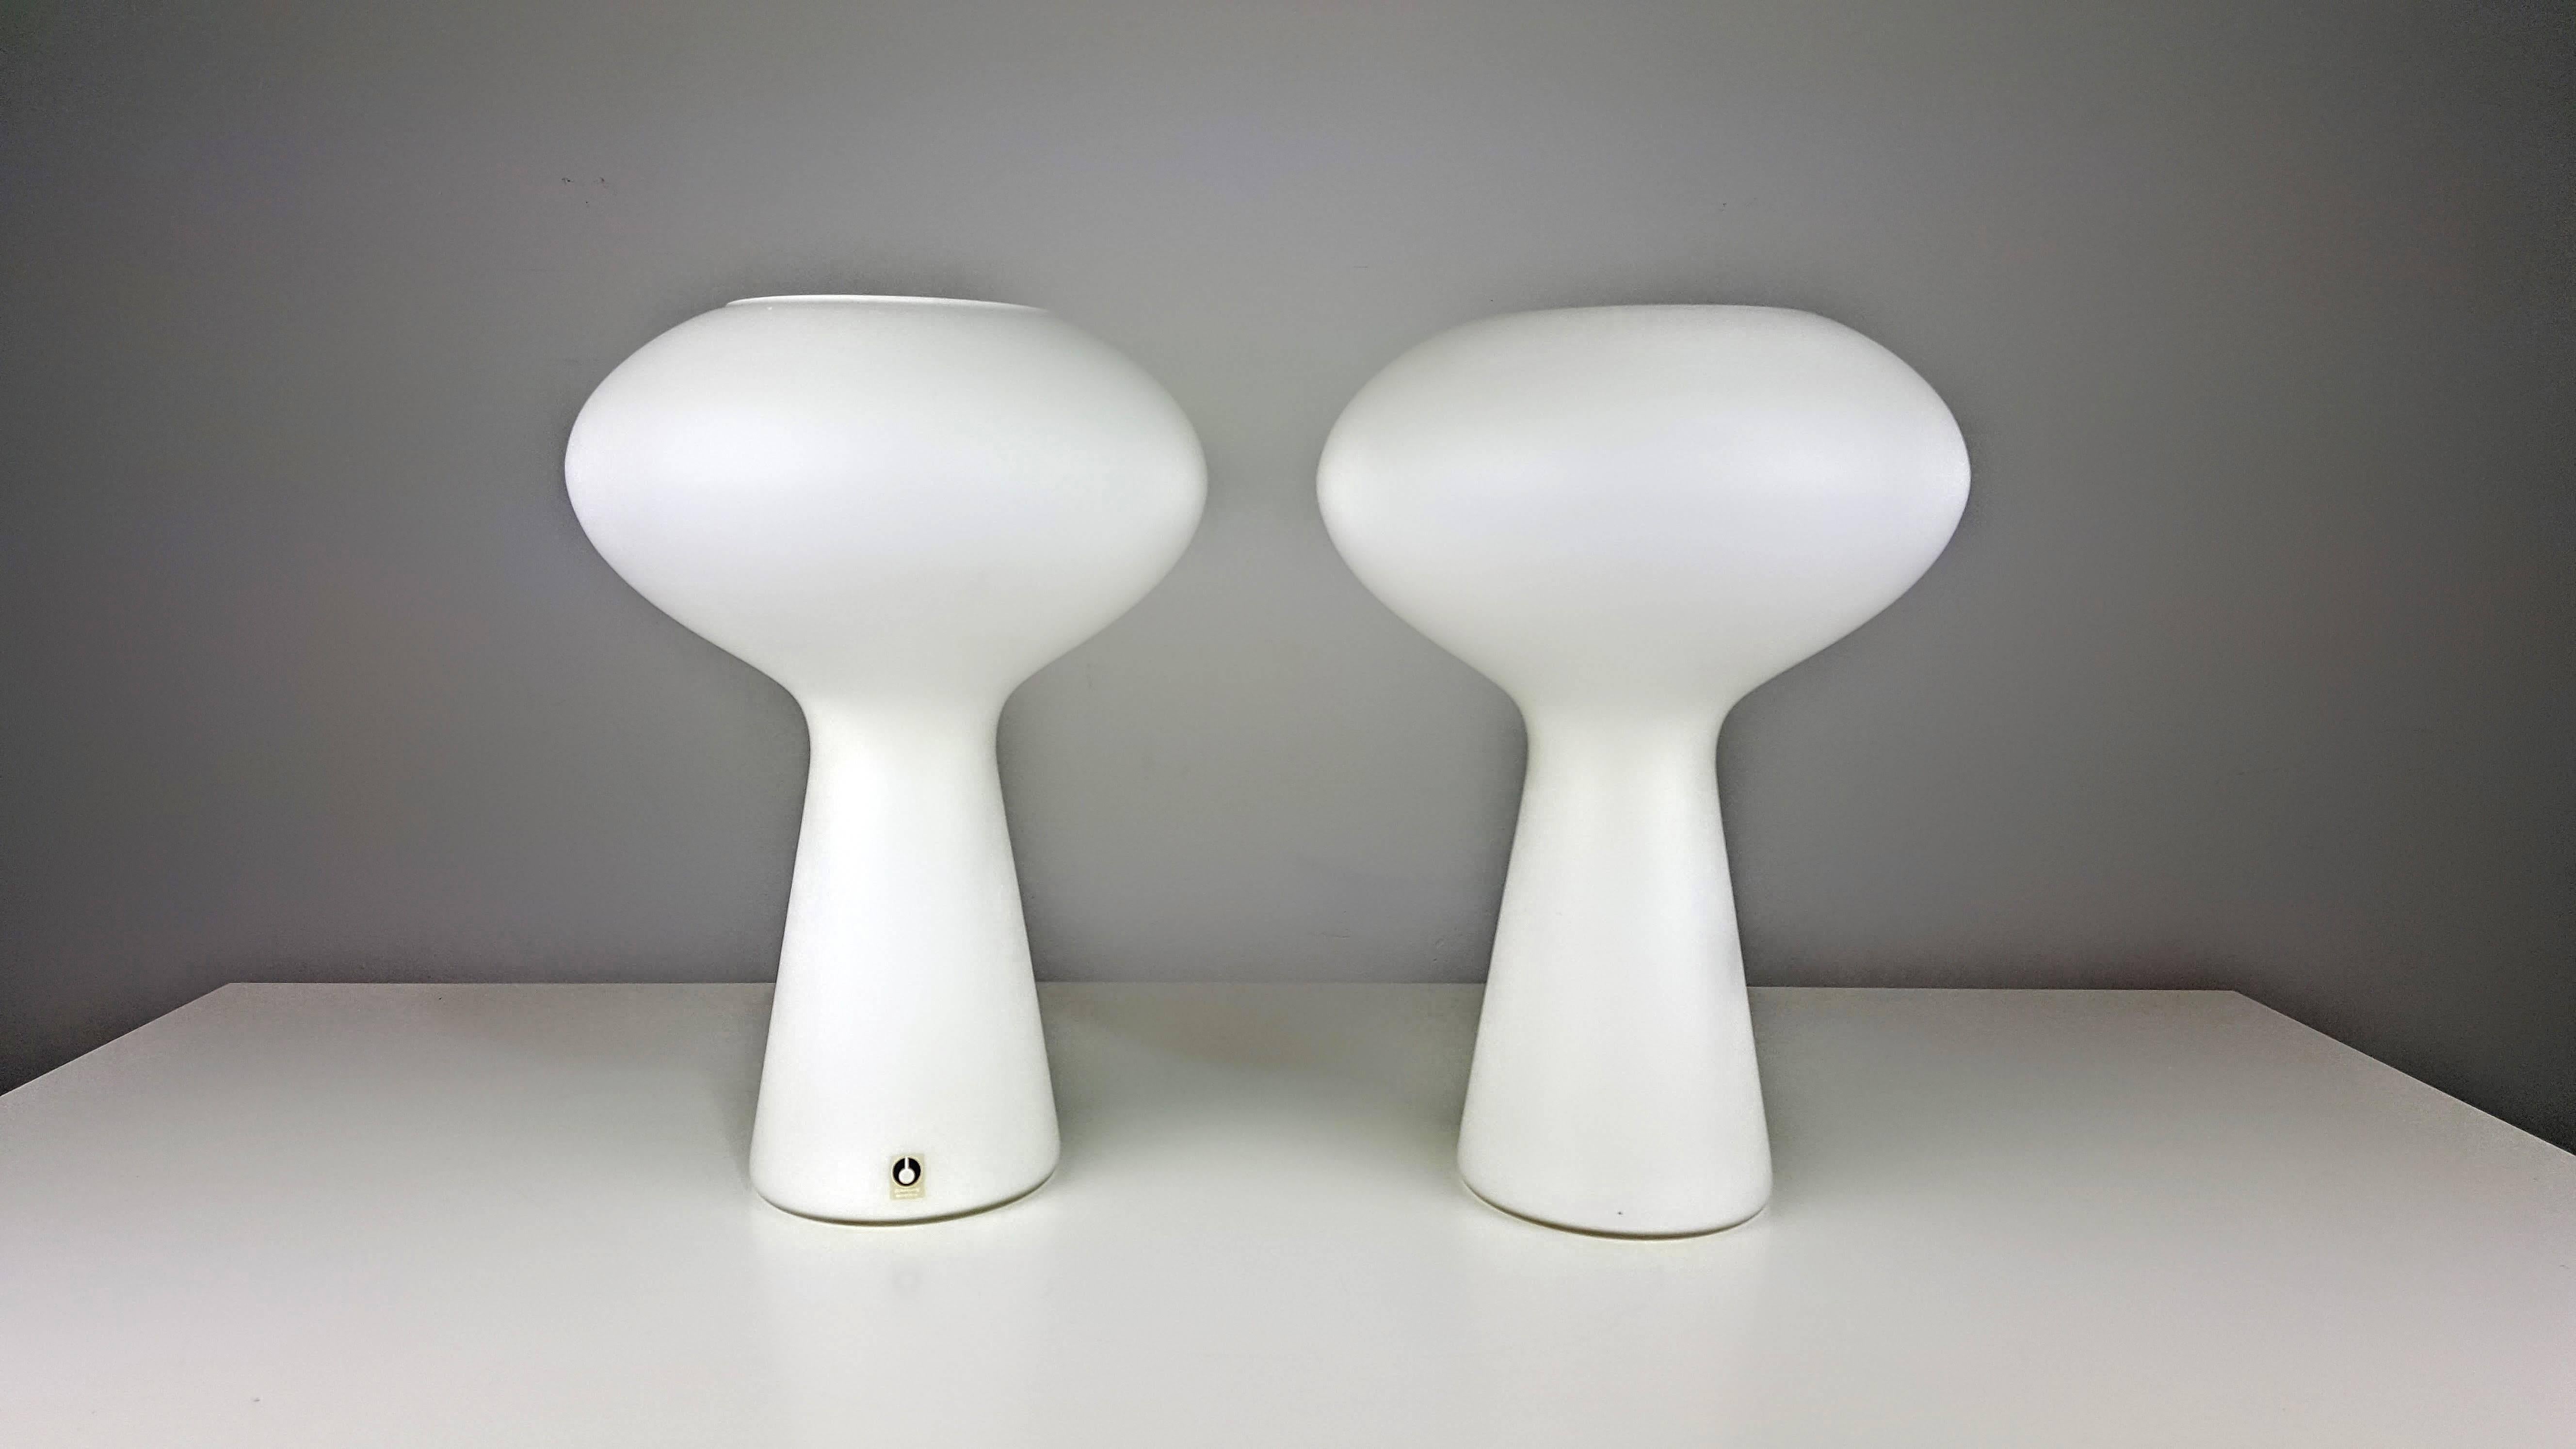 Pair of blown glass table lamps by Lisa Johansson-Pape, Sweden, 1960s.

See this item in our private NYC showroom! Refine Limited is located in the heart of Chelsea at the history Starrett-LeHigh Building, 601 West 26th Street, Suite M258. Please